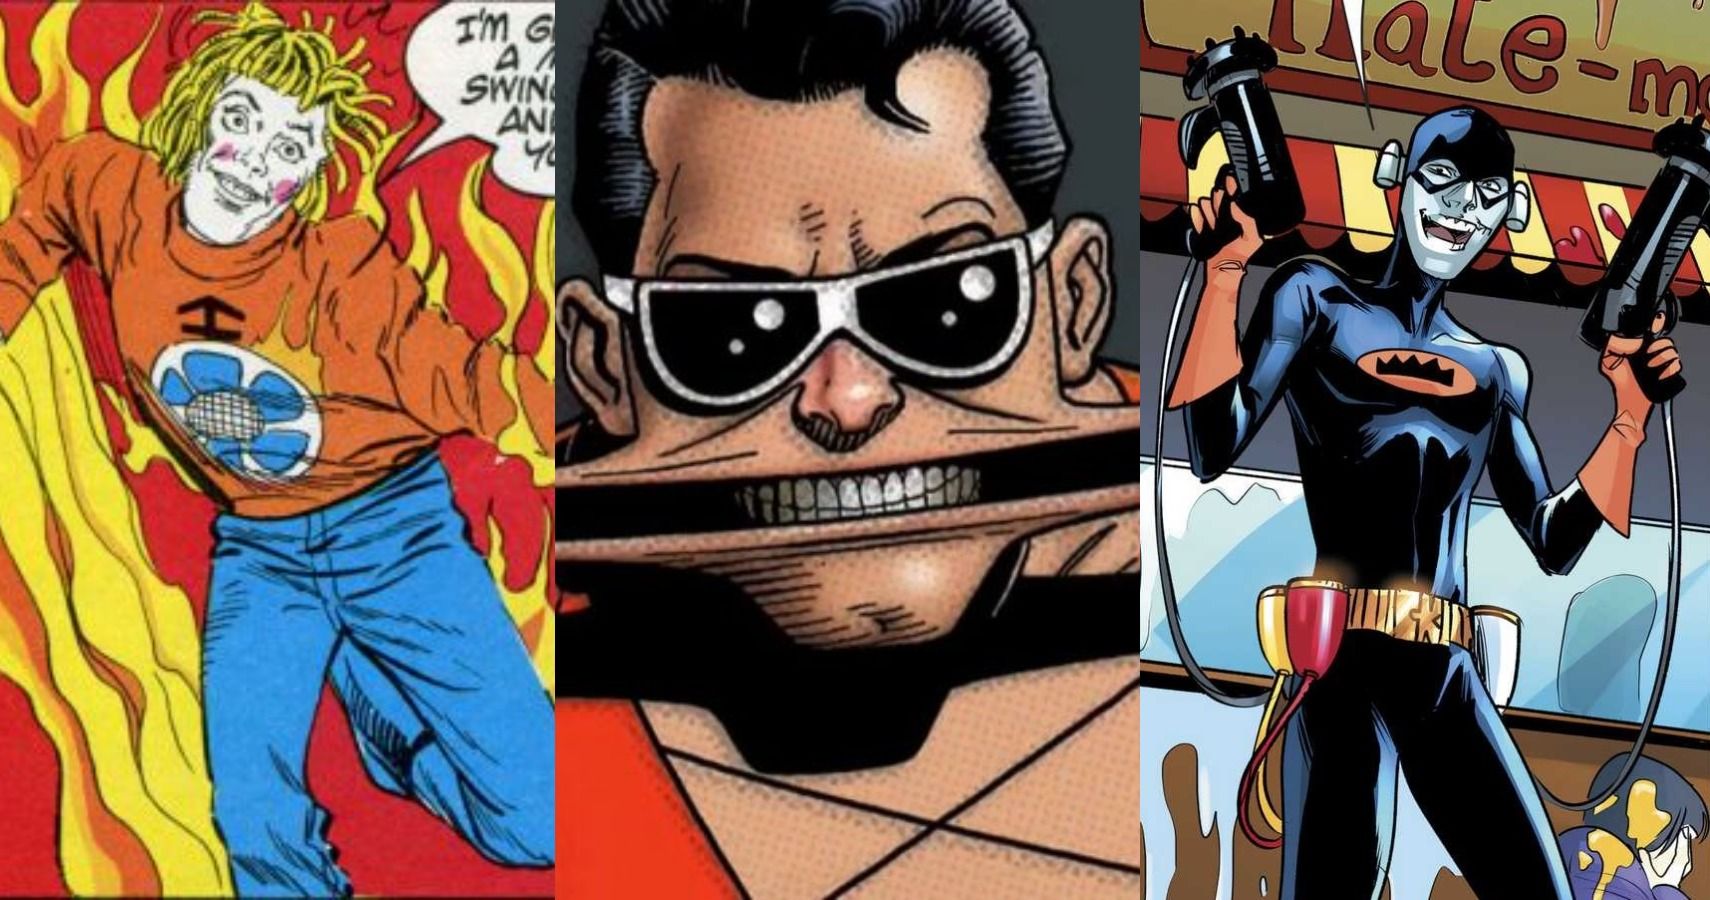 A combined header image that features three of DC's strangest characters: Brother Power The Geek on the left, Plastic Man in the middle, and Condiment King on the right.